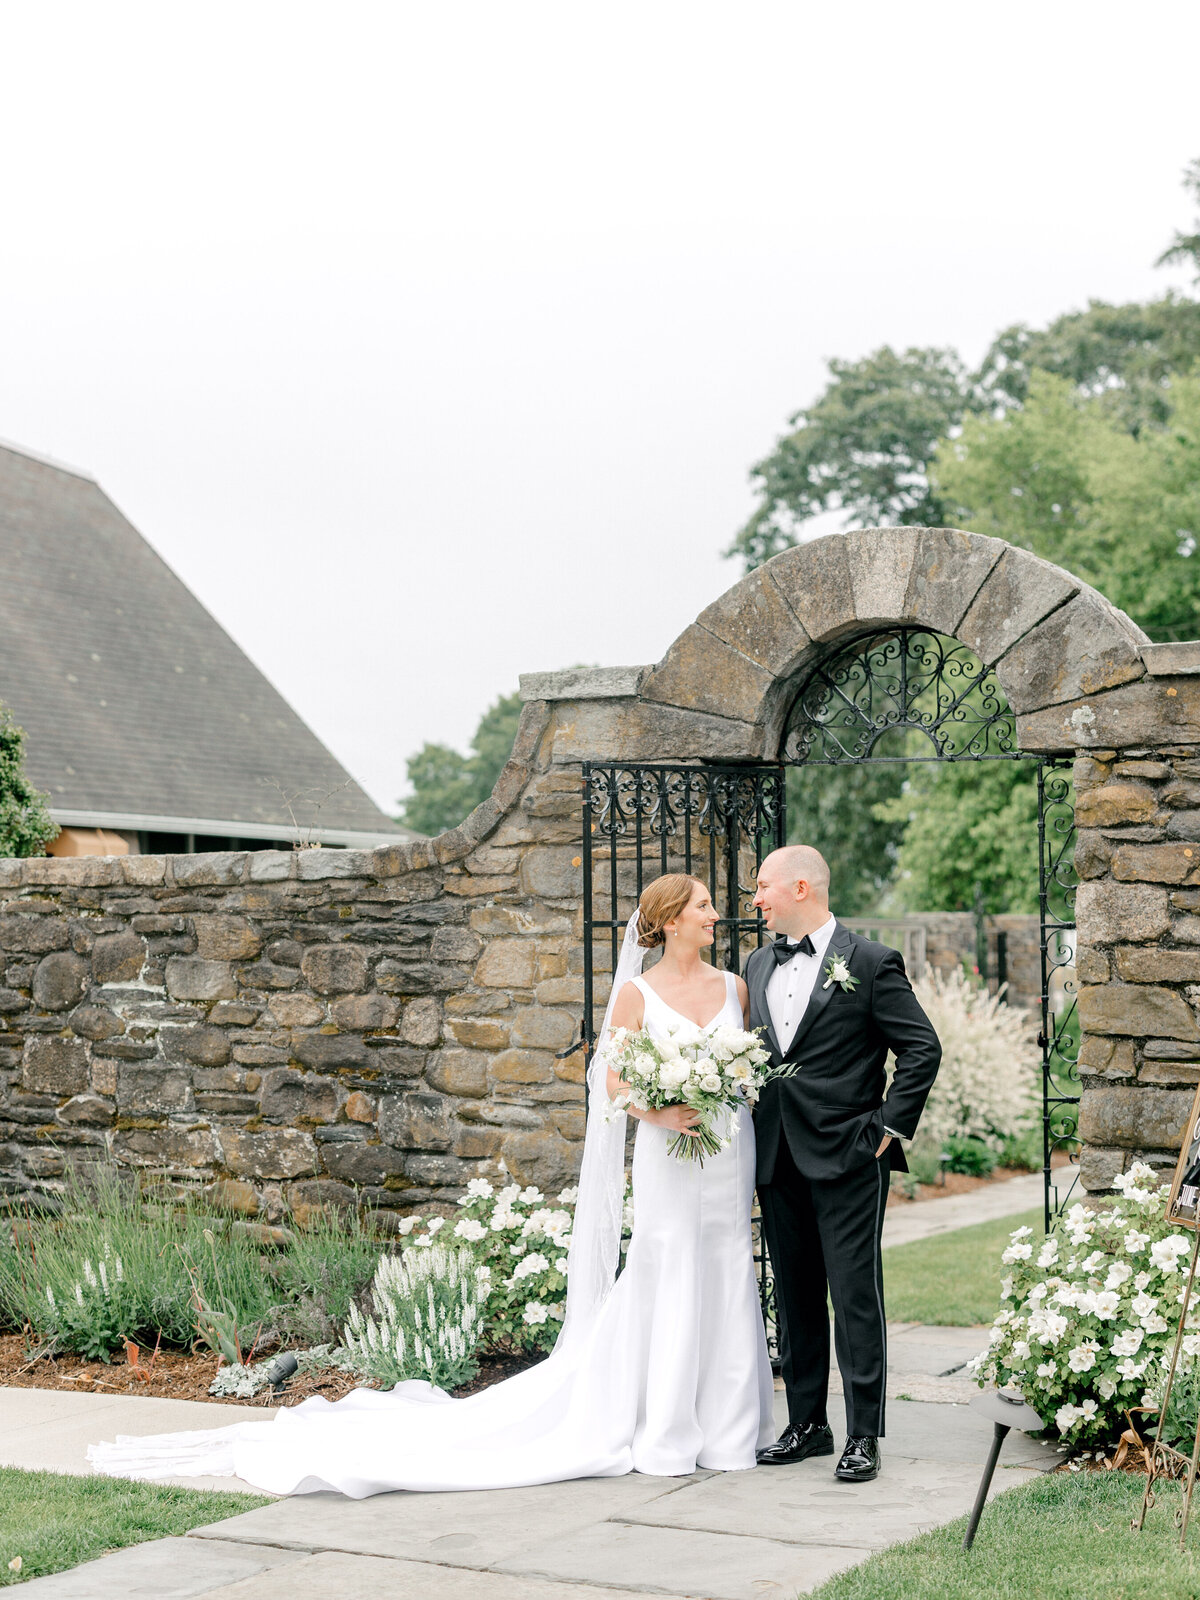 Bride and groom standing together smiling at each other in front of a stone gate